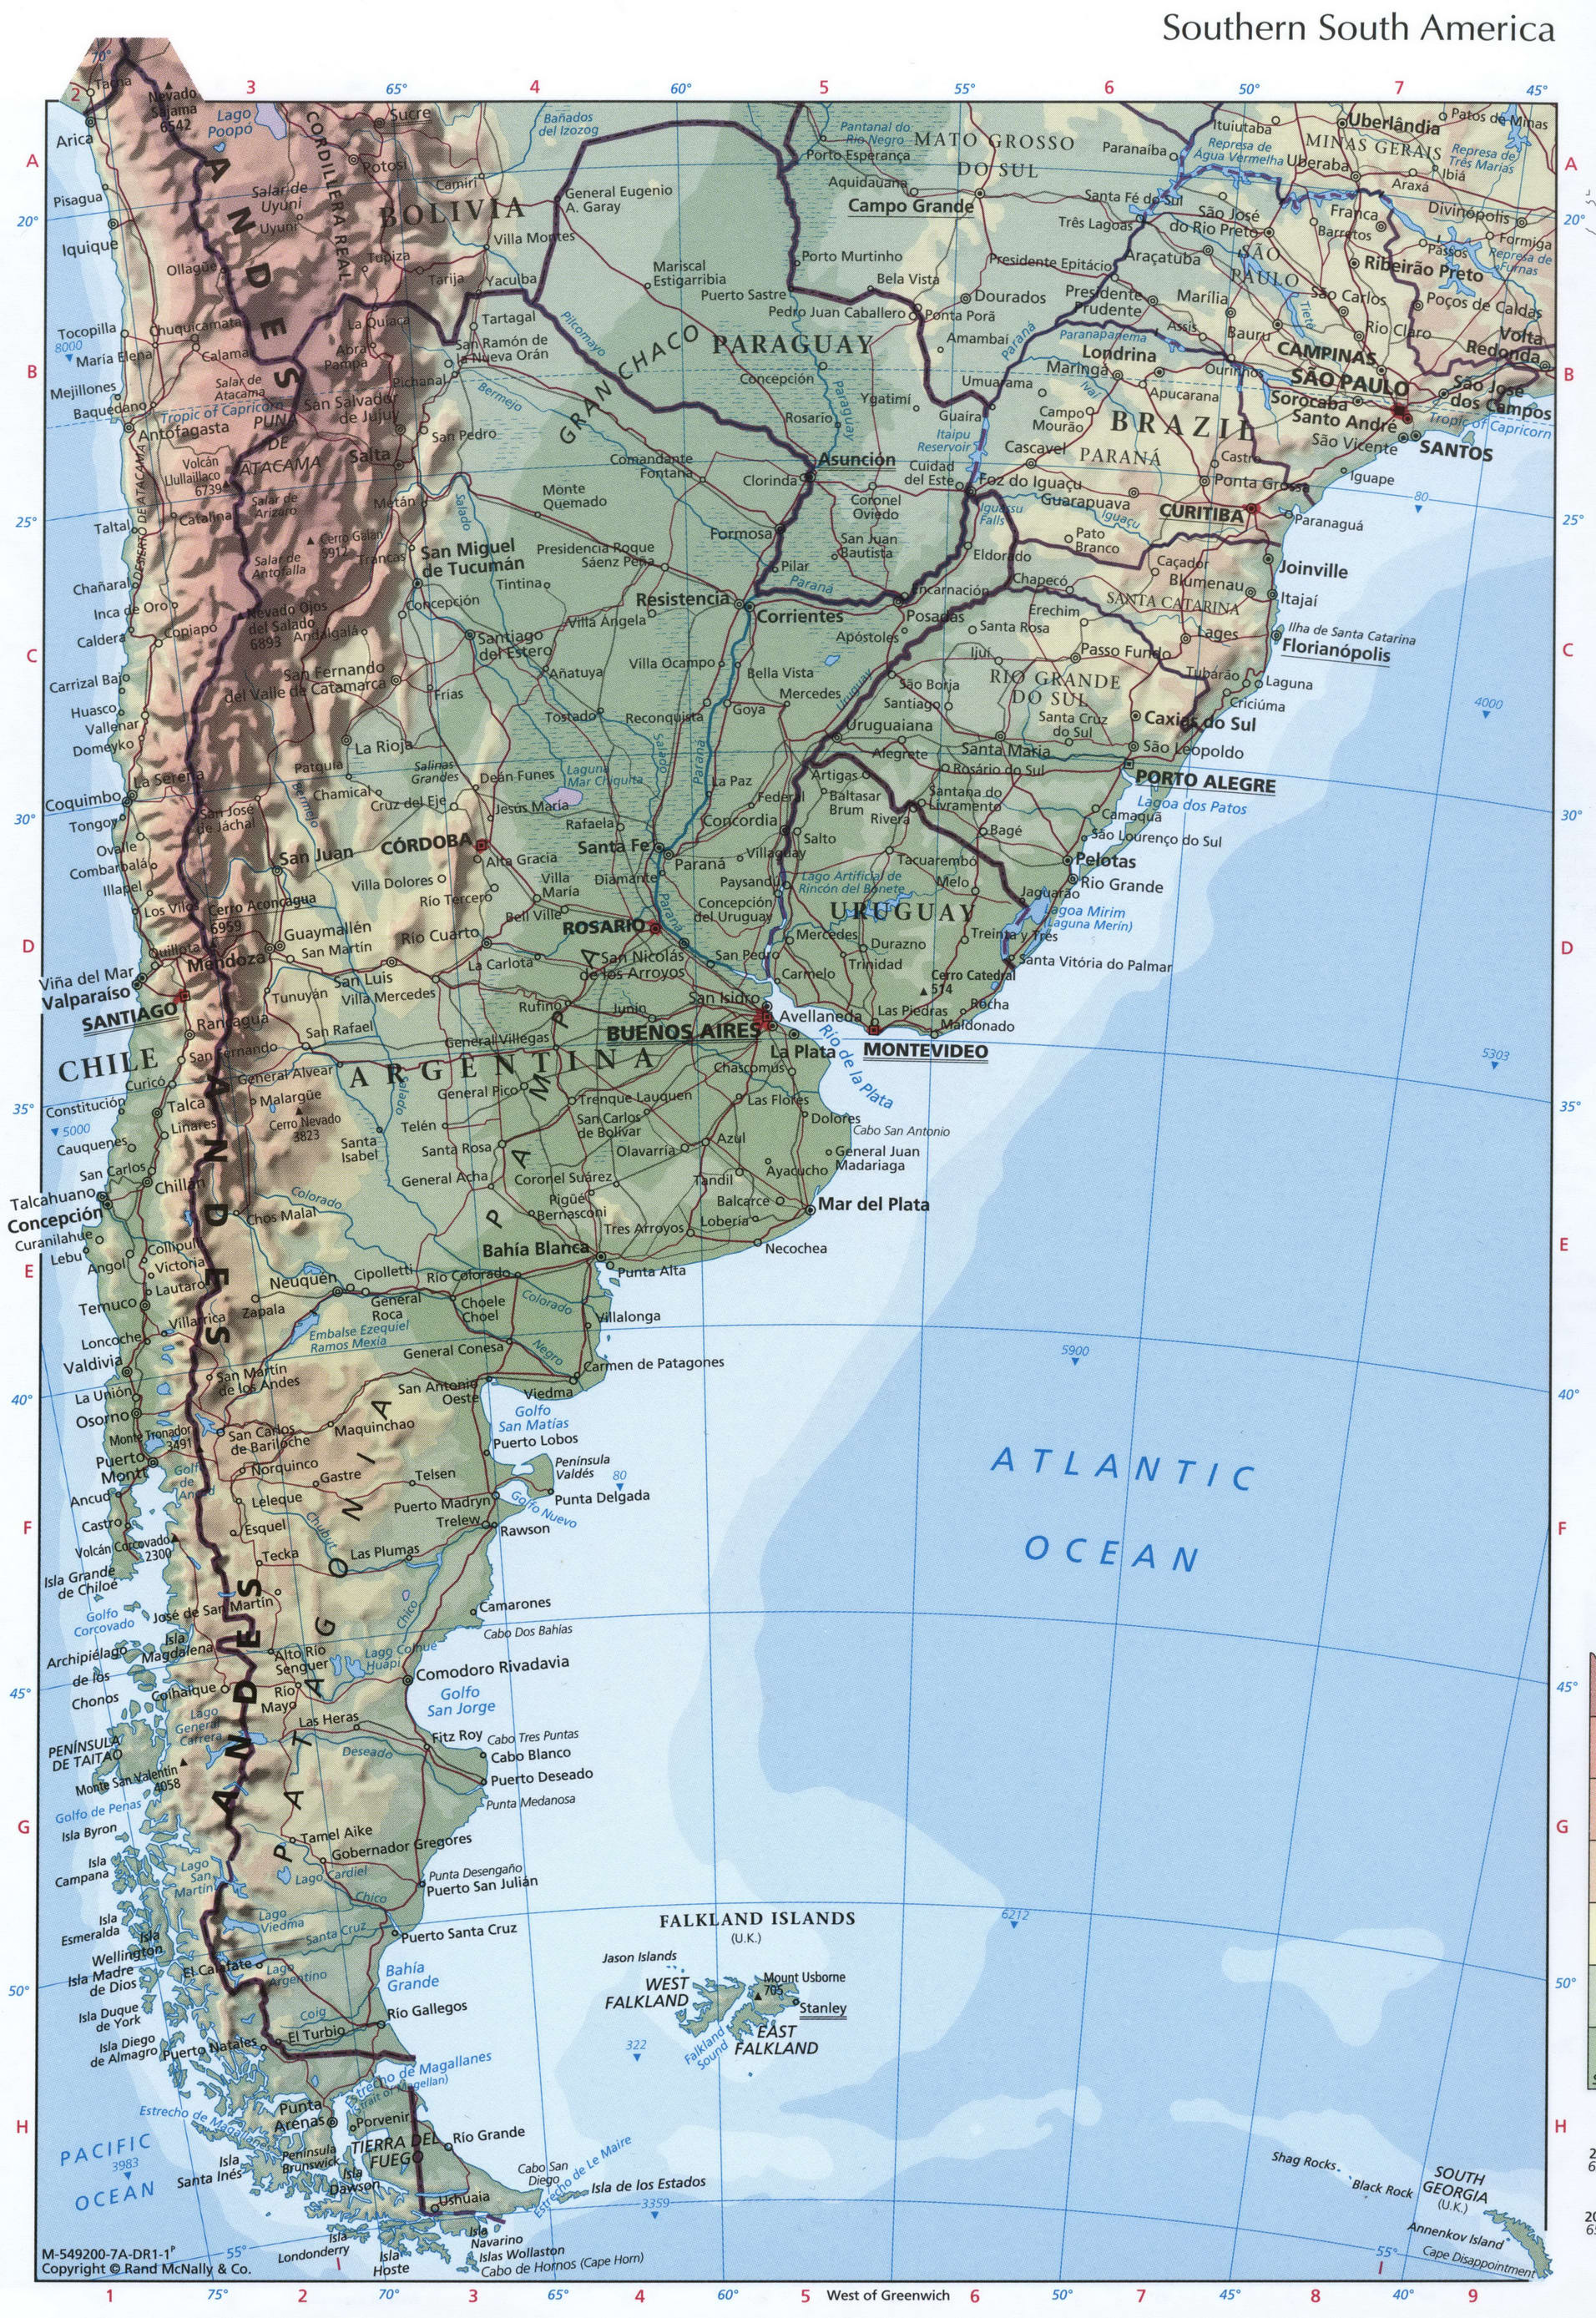 Southern South America map